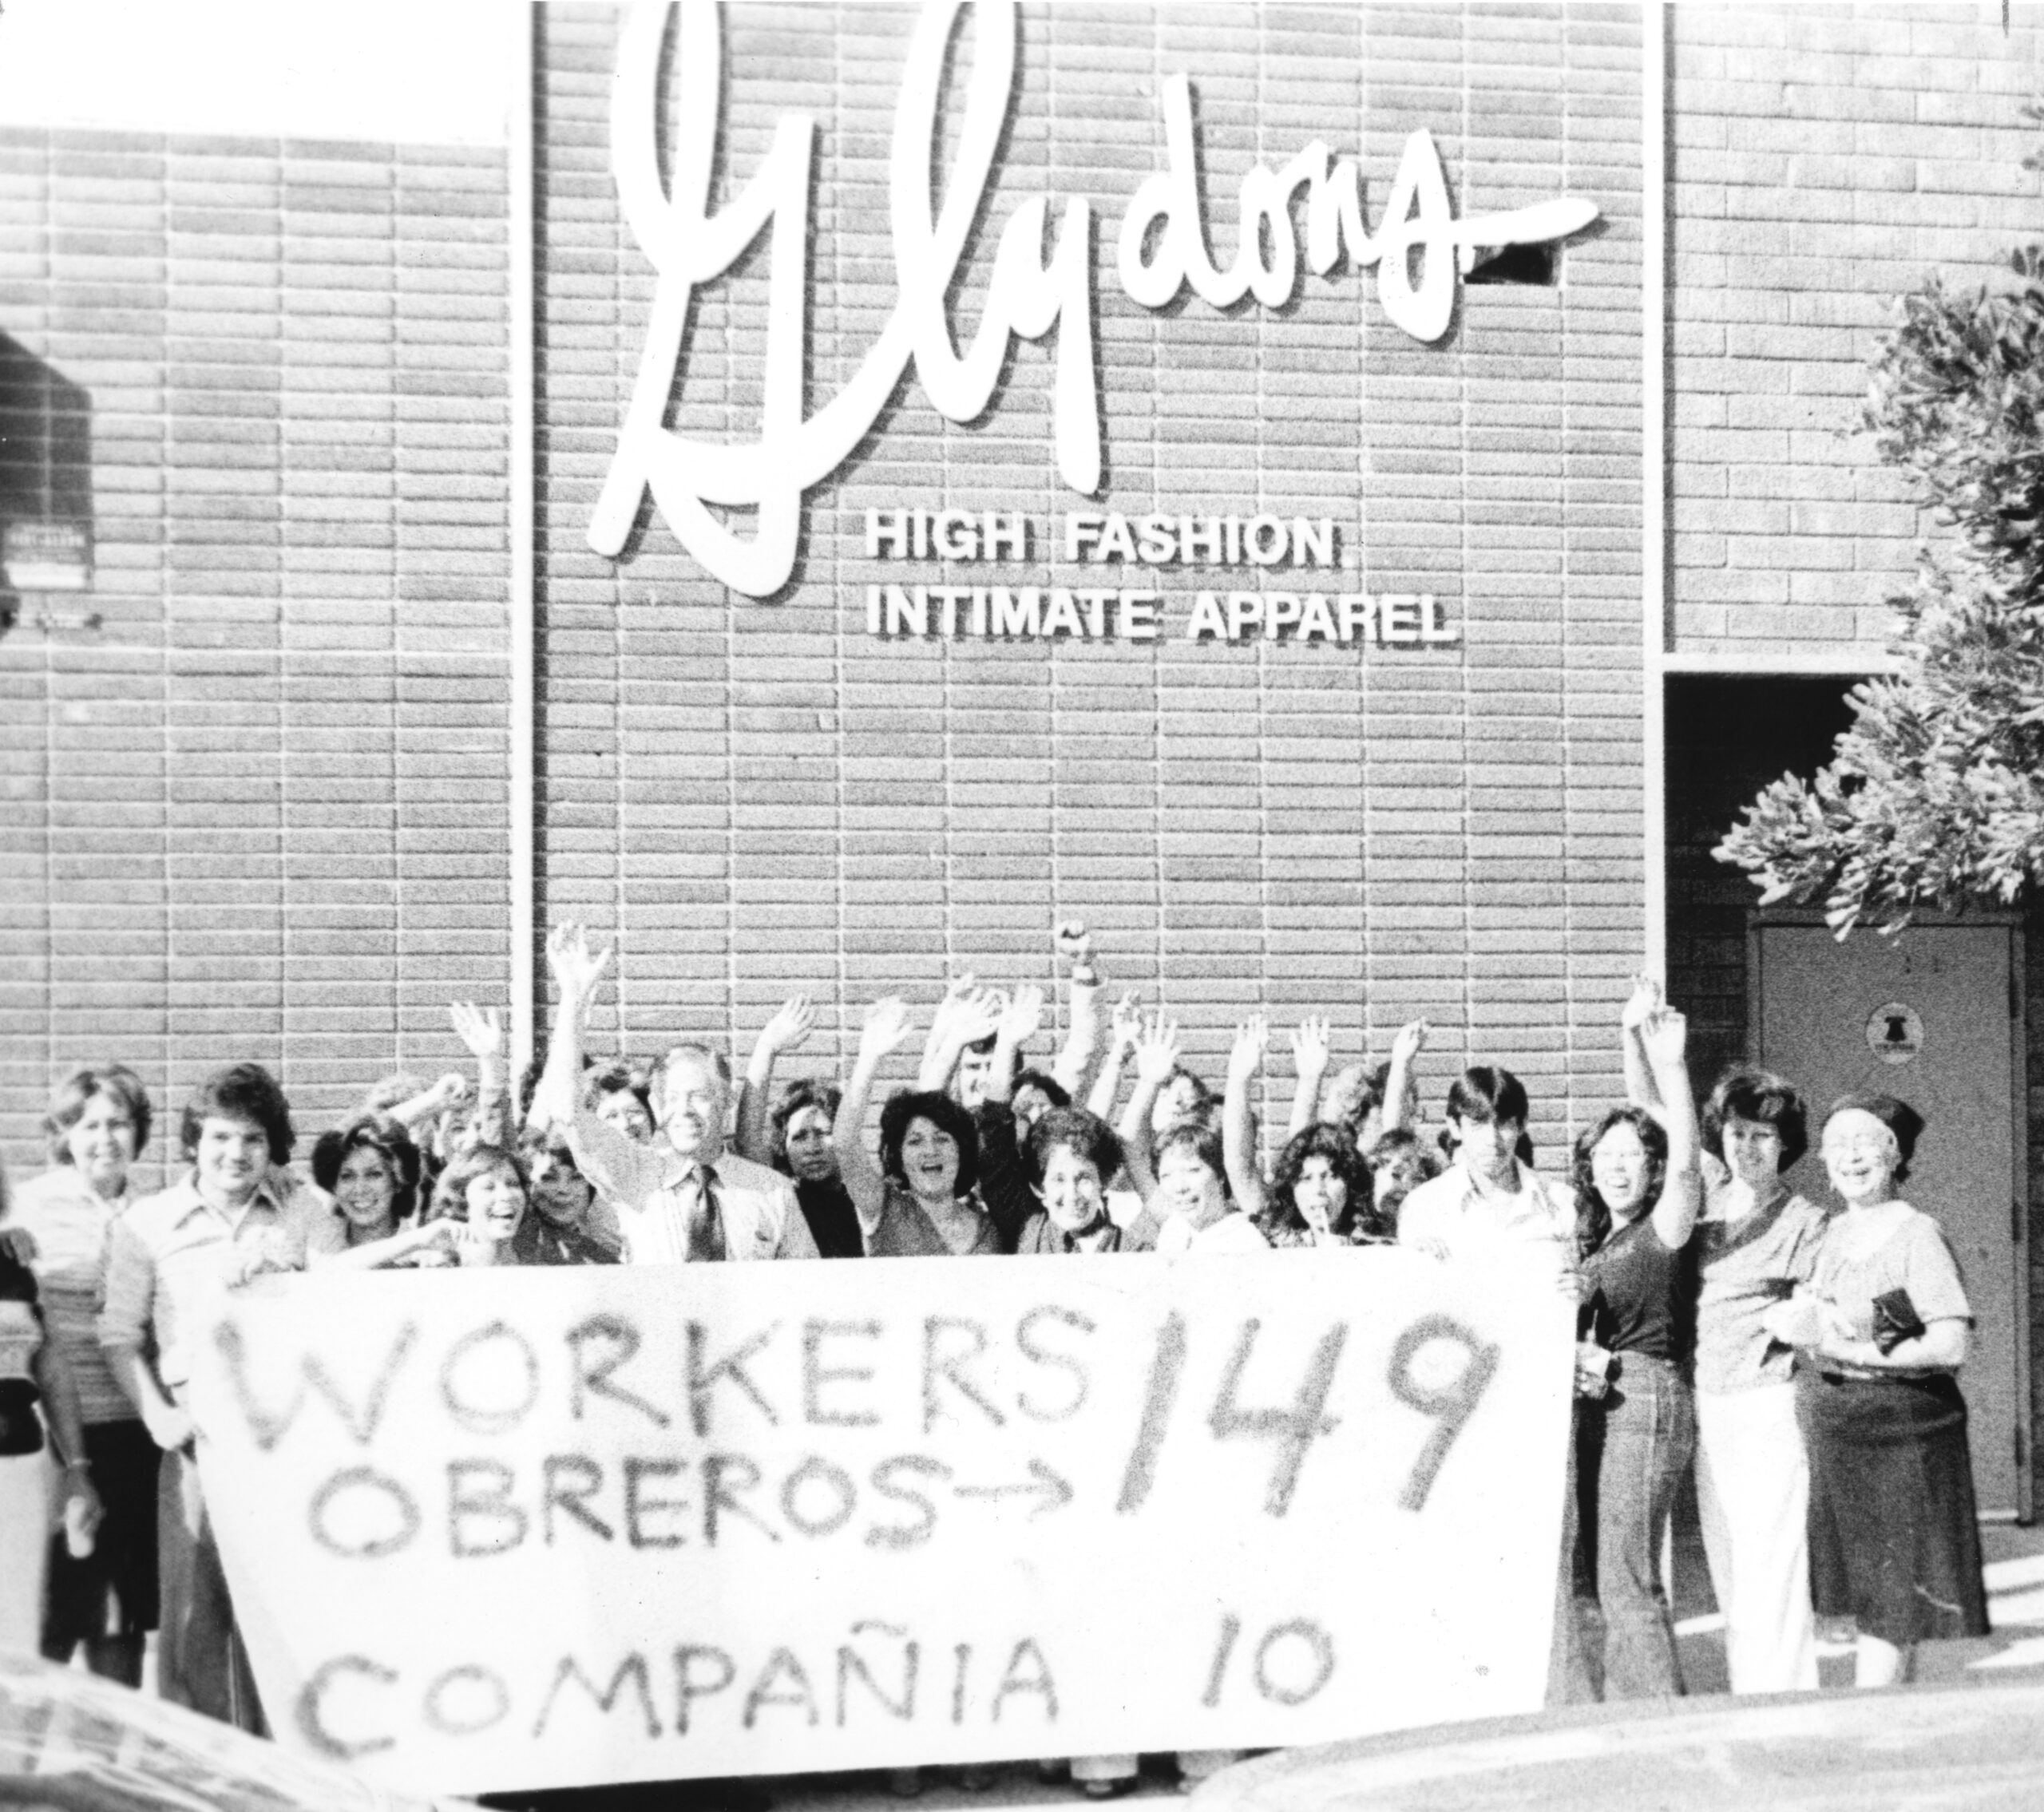 Workers celebrate a union victory outside of a garment factory in Los Angeles, 1980. They stand waving and smiling while holding a sign that indicates that 149 workers voted for the union and 10 against it.